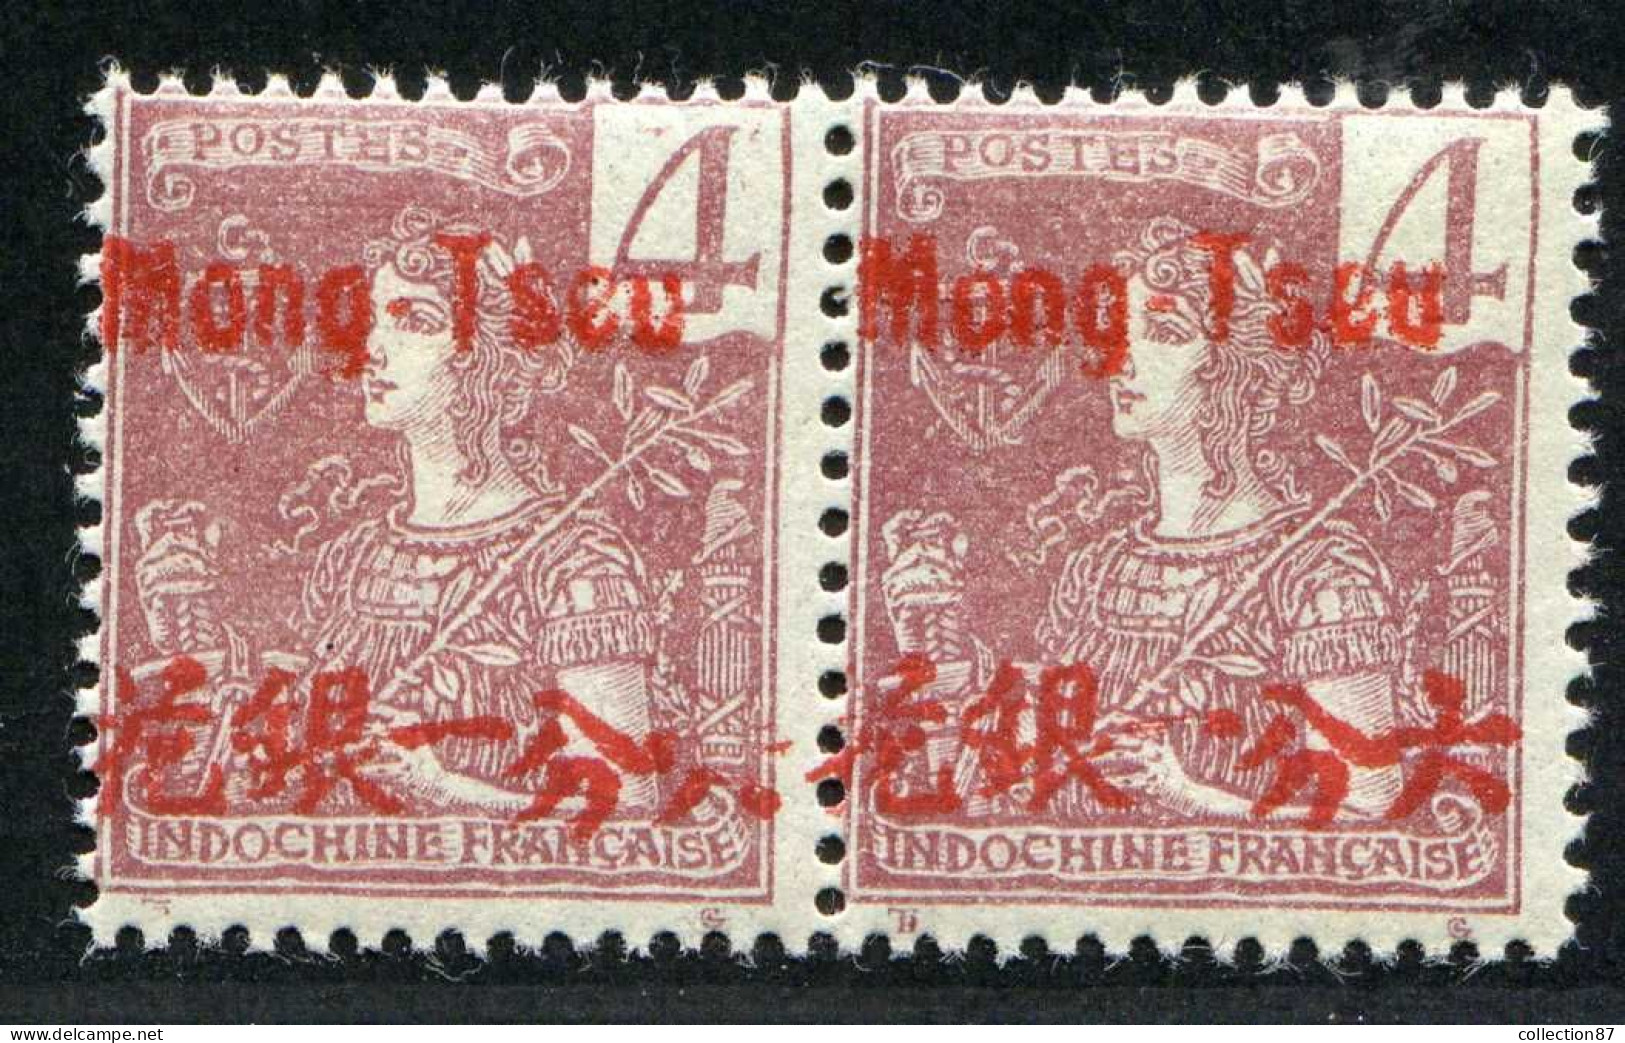 REF 089 > MONG-TZEU < N° 19 * * En Paire < Neuf Luxe Dos Visible - MNH * * - Neufs